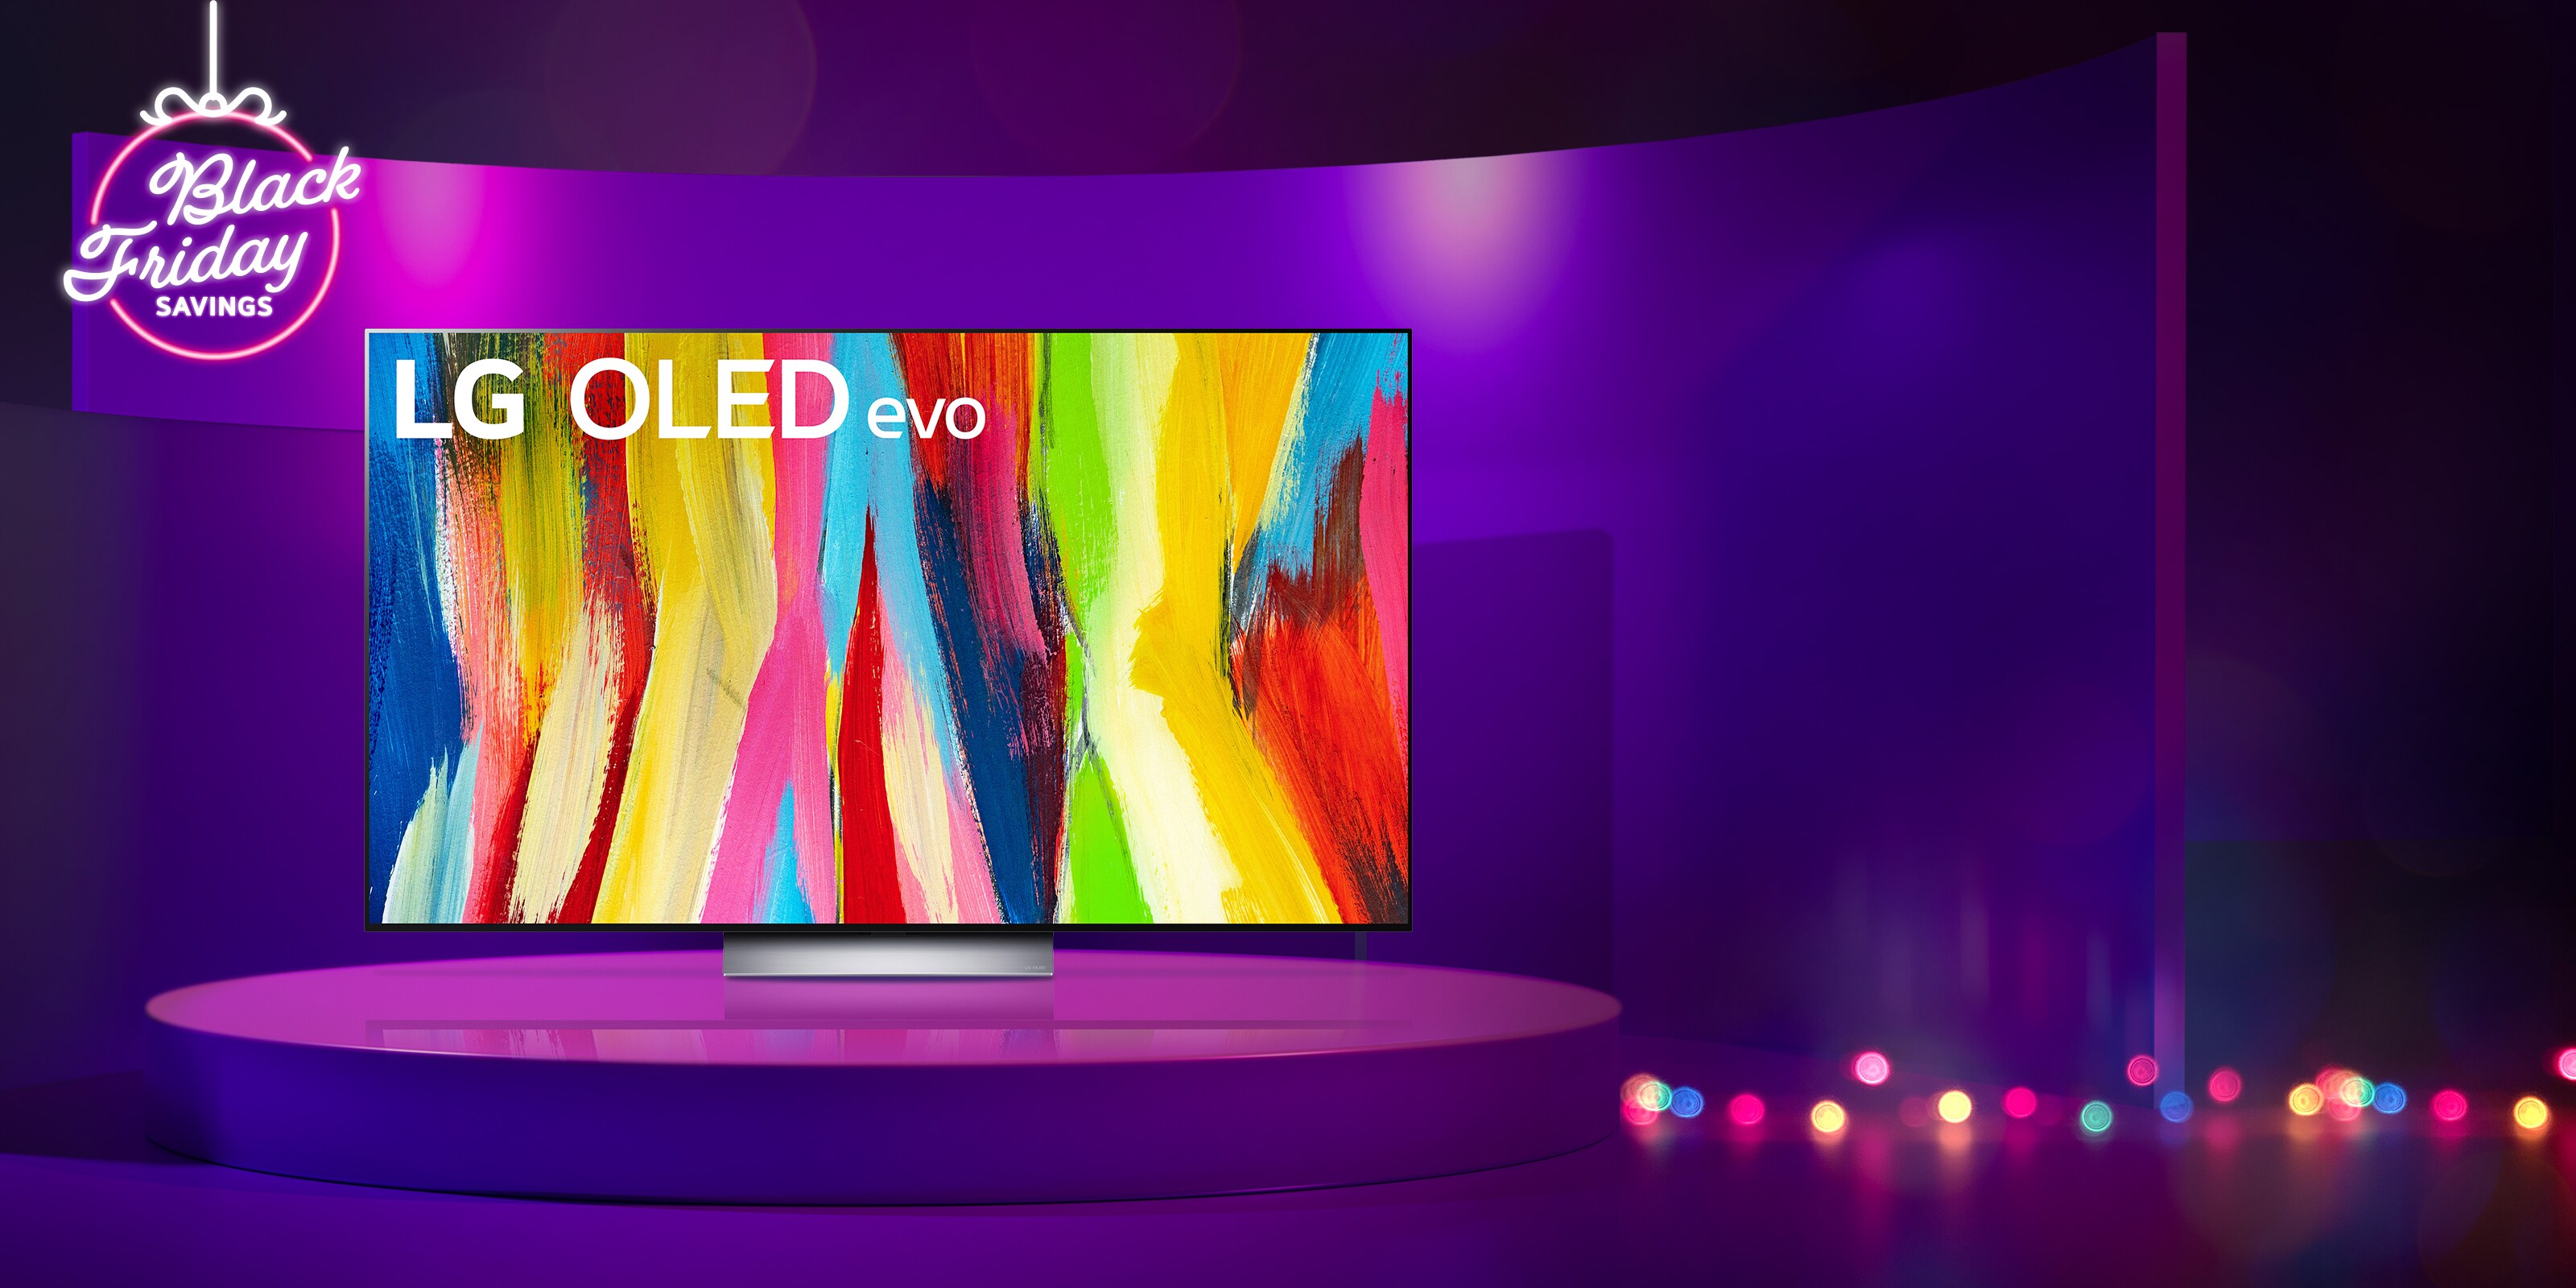 LG OLED TV infill in a purple Make the Season Bright neon sign